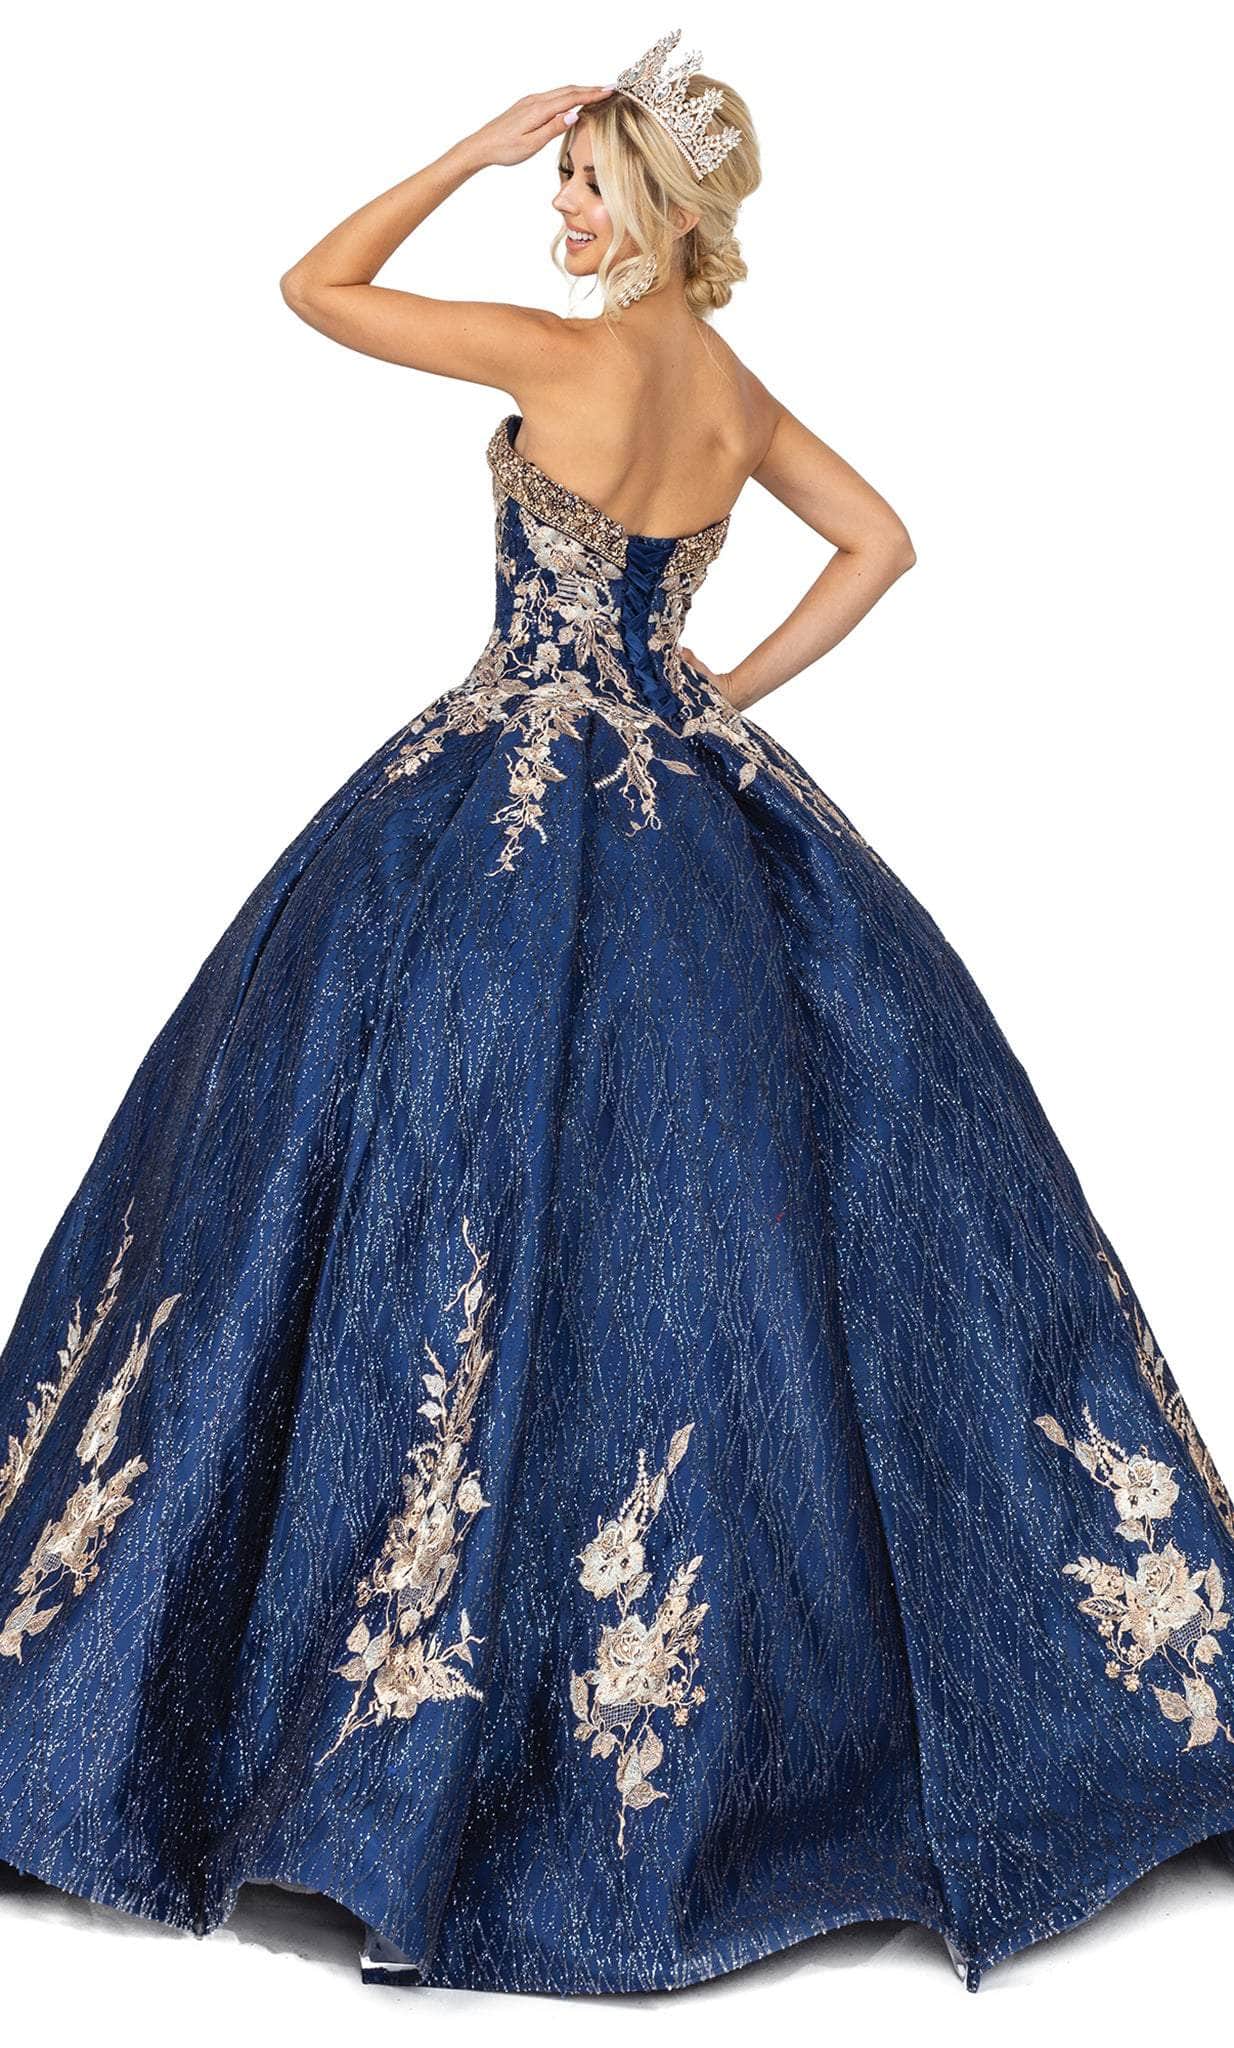 Dancing Queen 1541 - Embroidered Quinceanera Ballgown Long Dresses